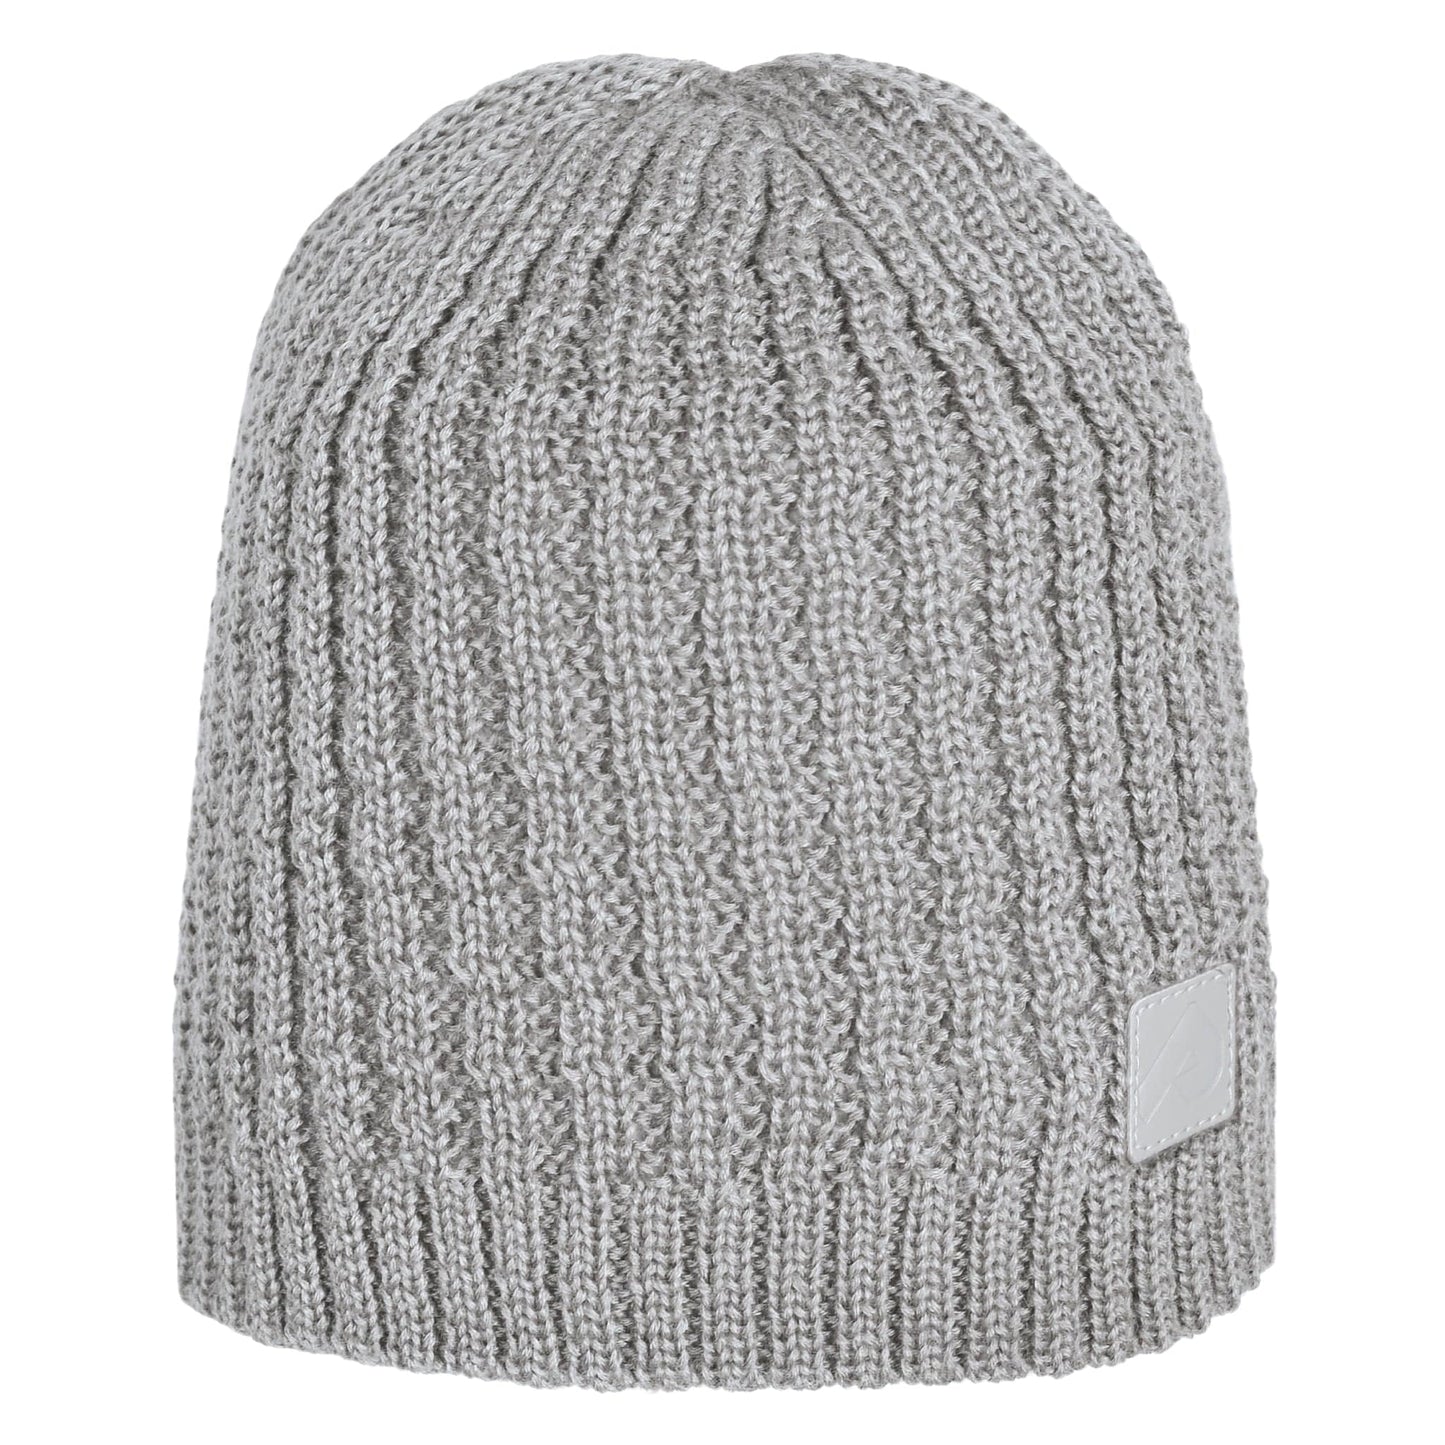 Knitted acrylic hat - Light Gray